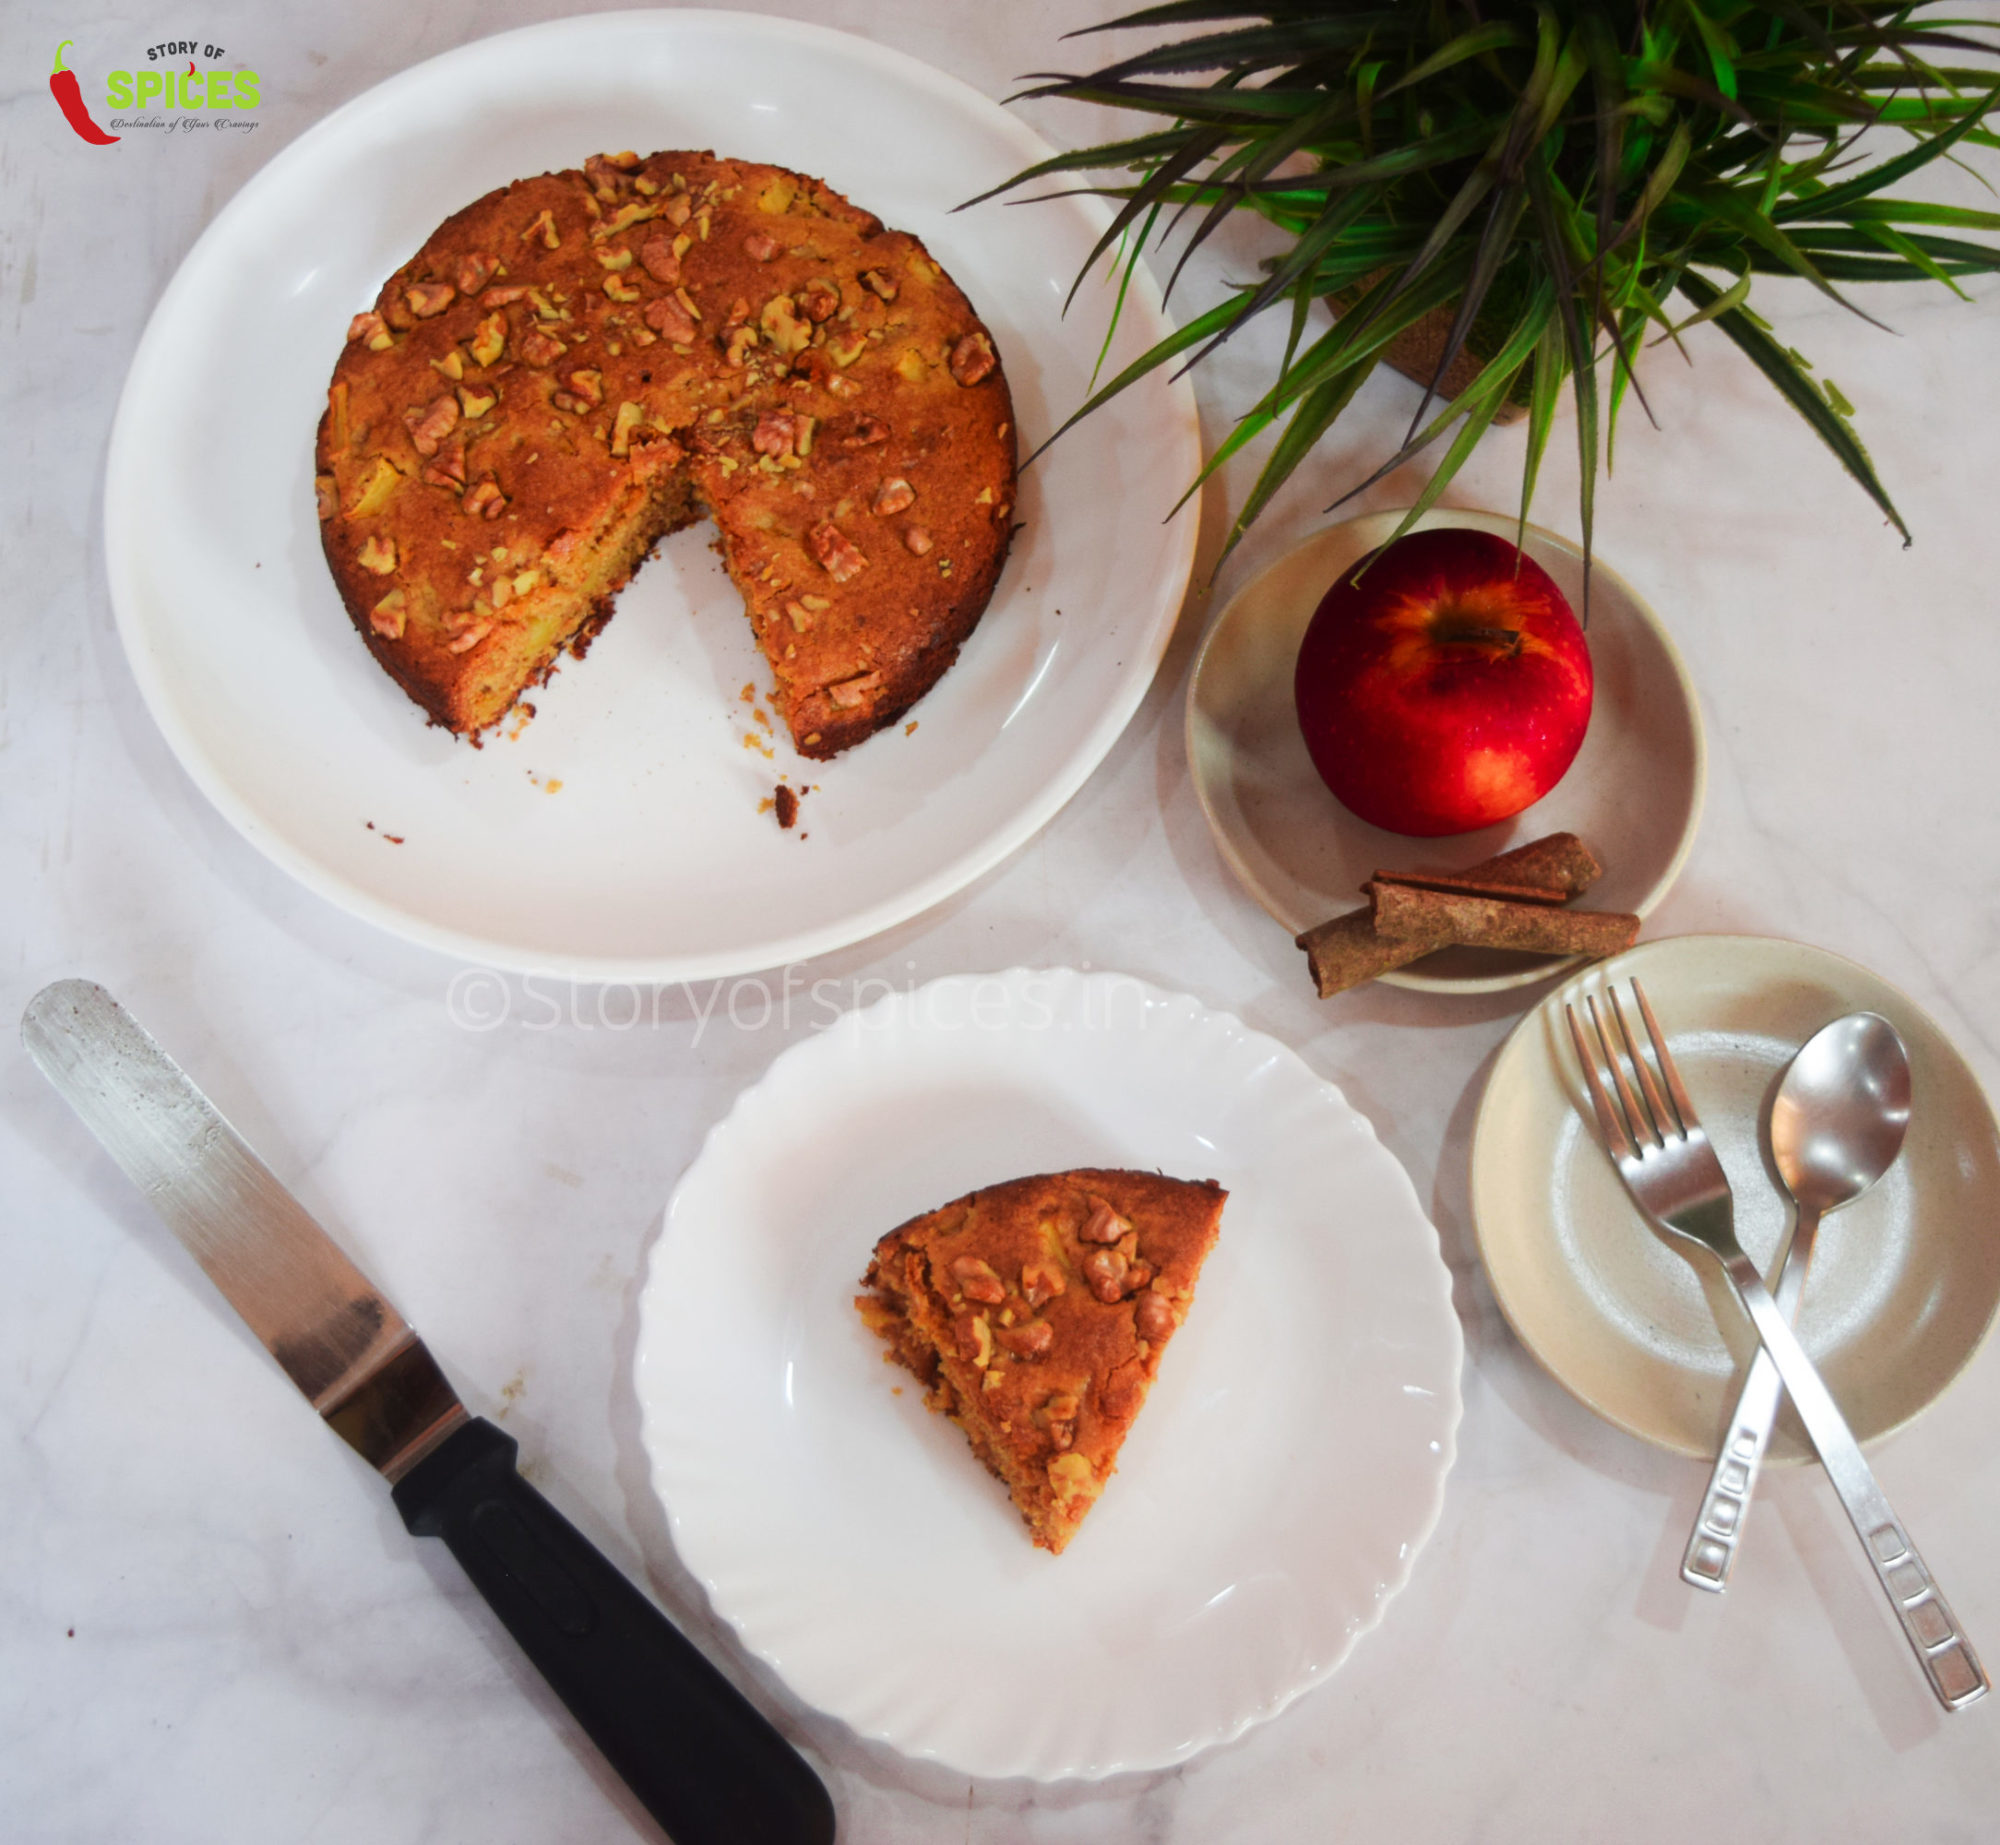 apple-oat-cake-recipe-story-of-spices